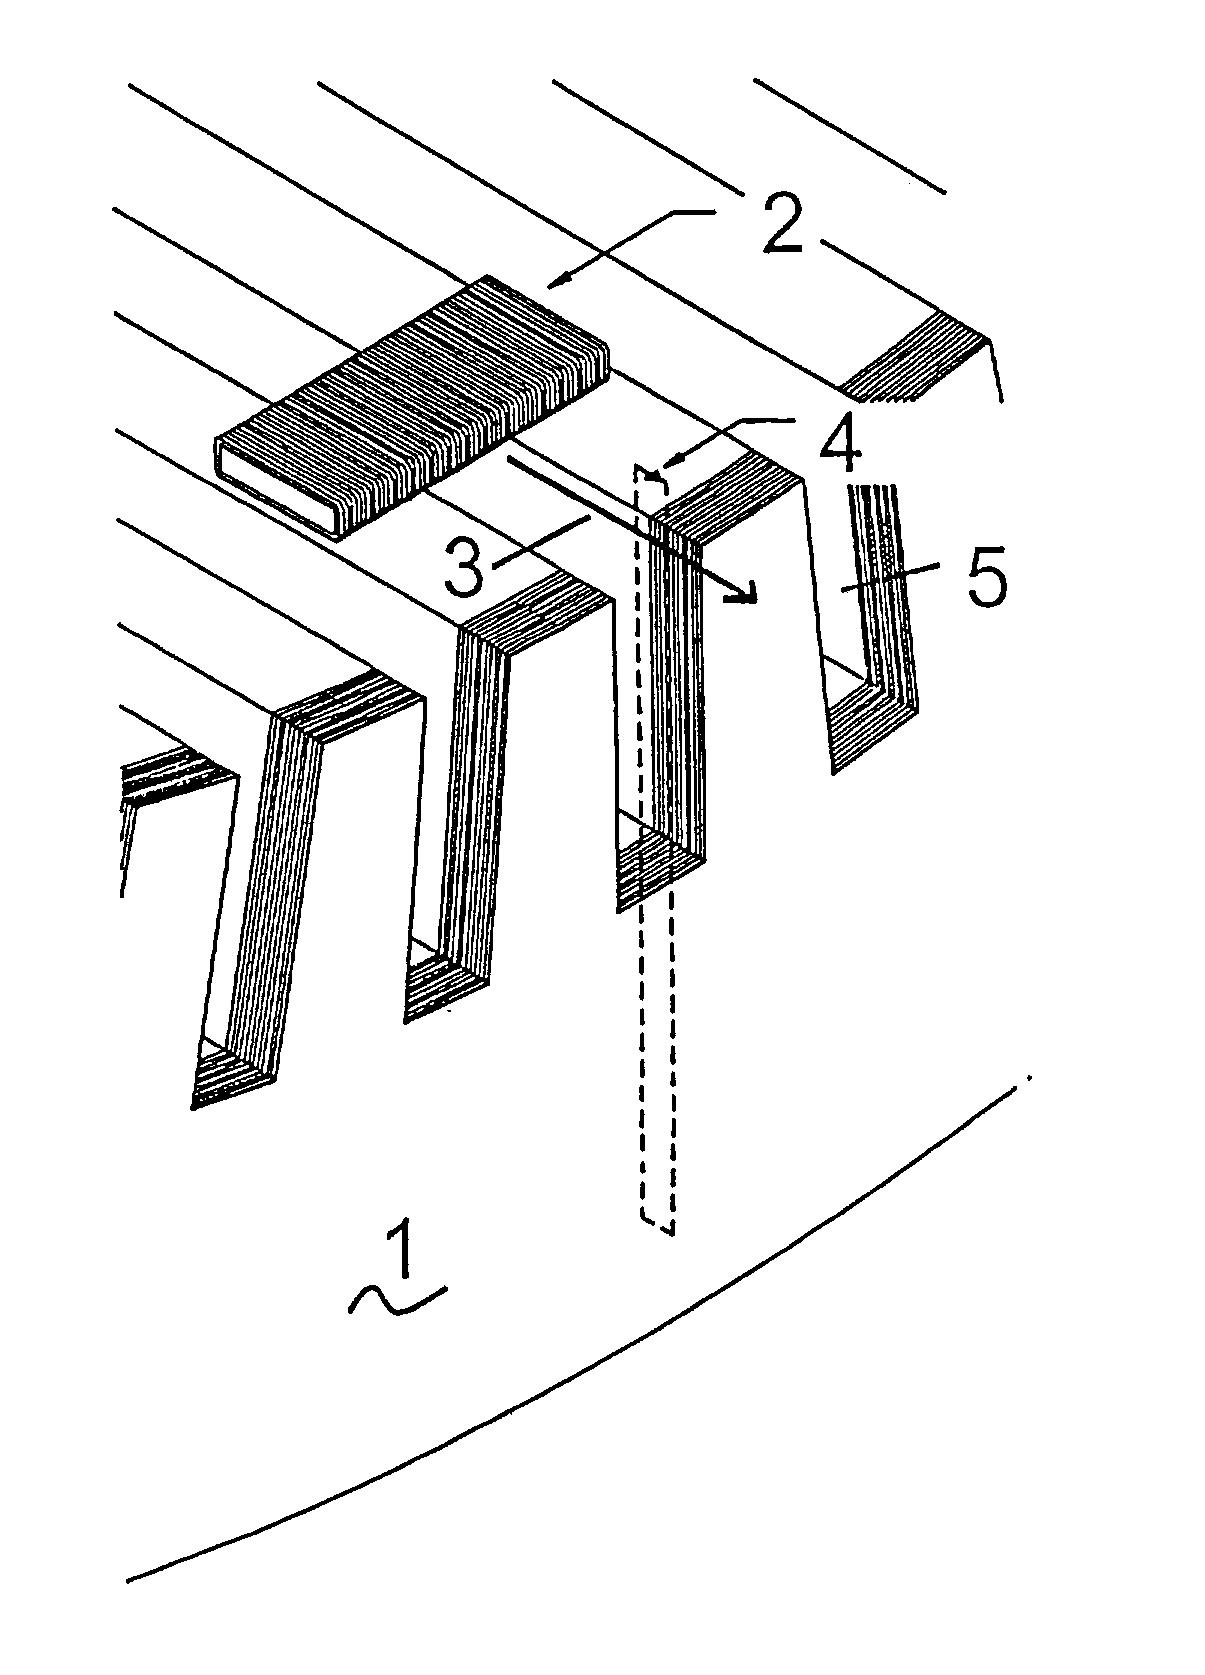 Method and device for inspecting laminated iron cores of electrical machines for interlamination shorts